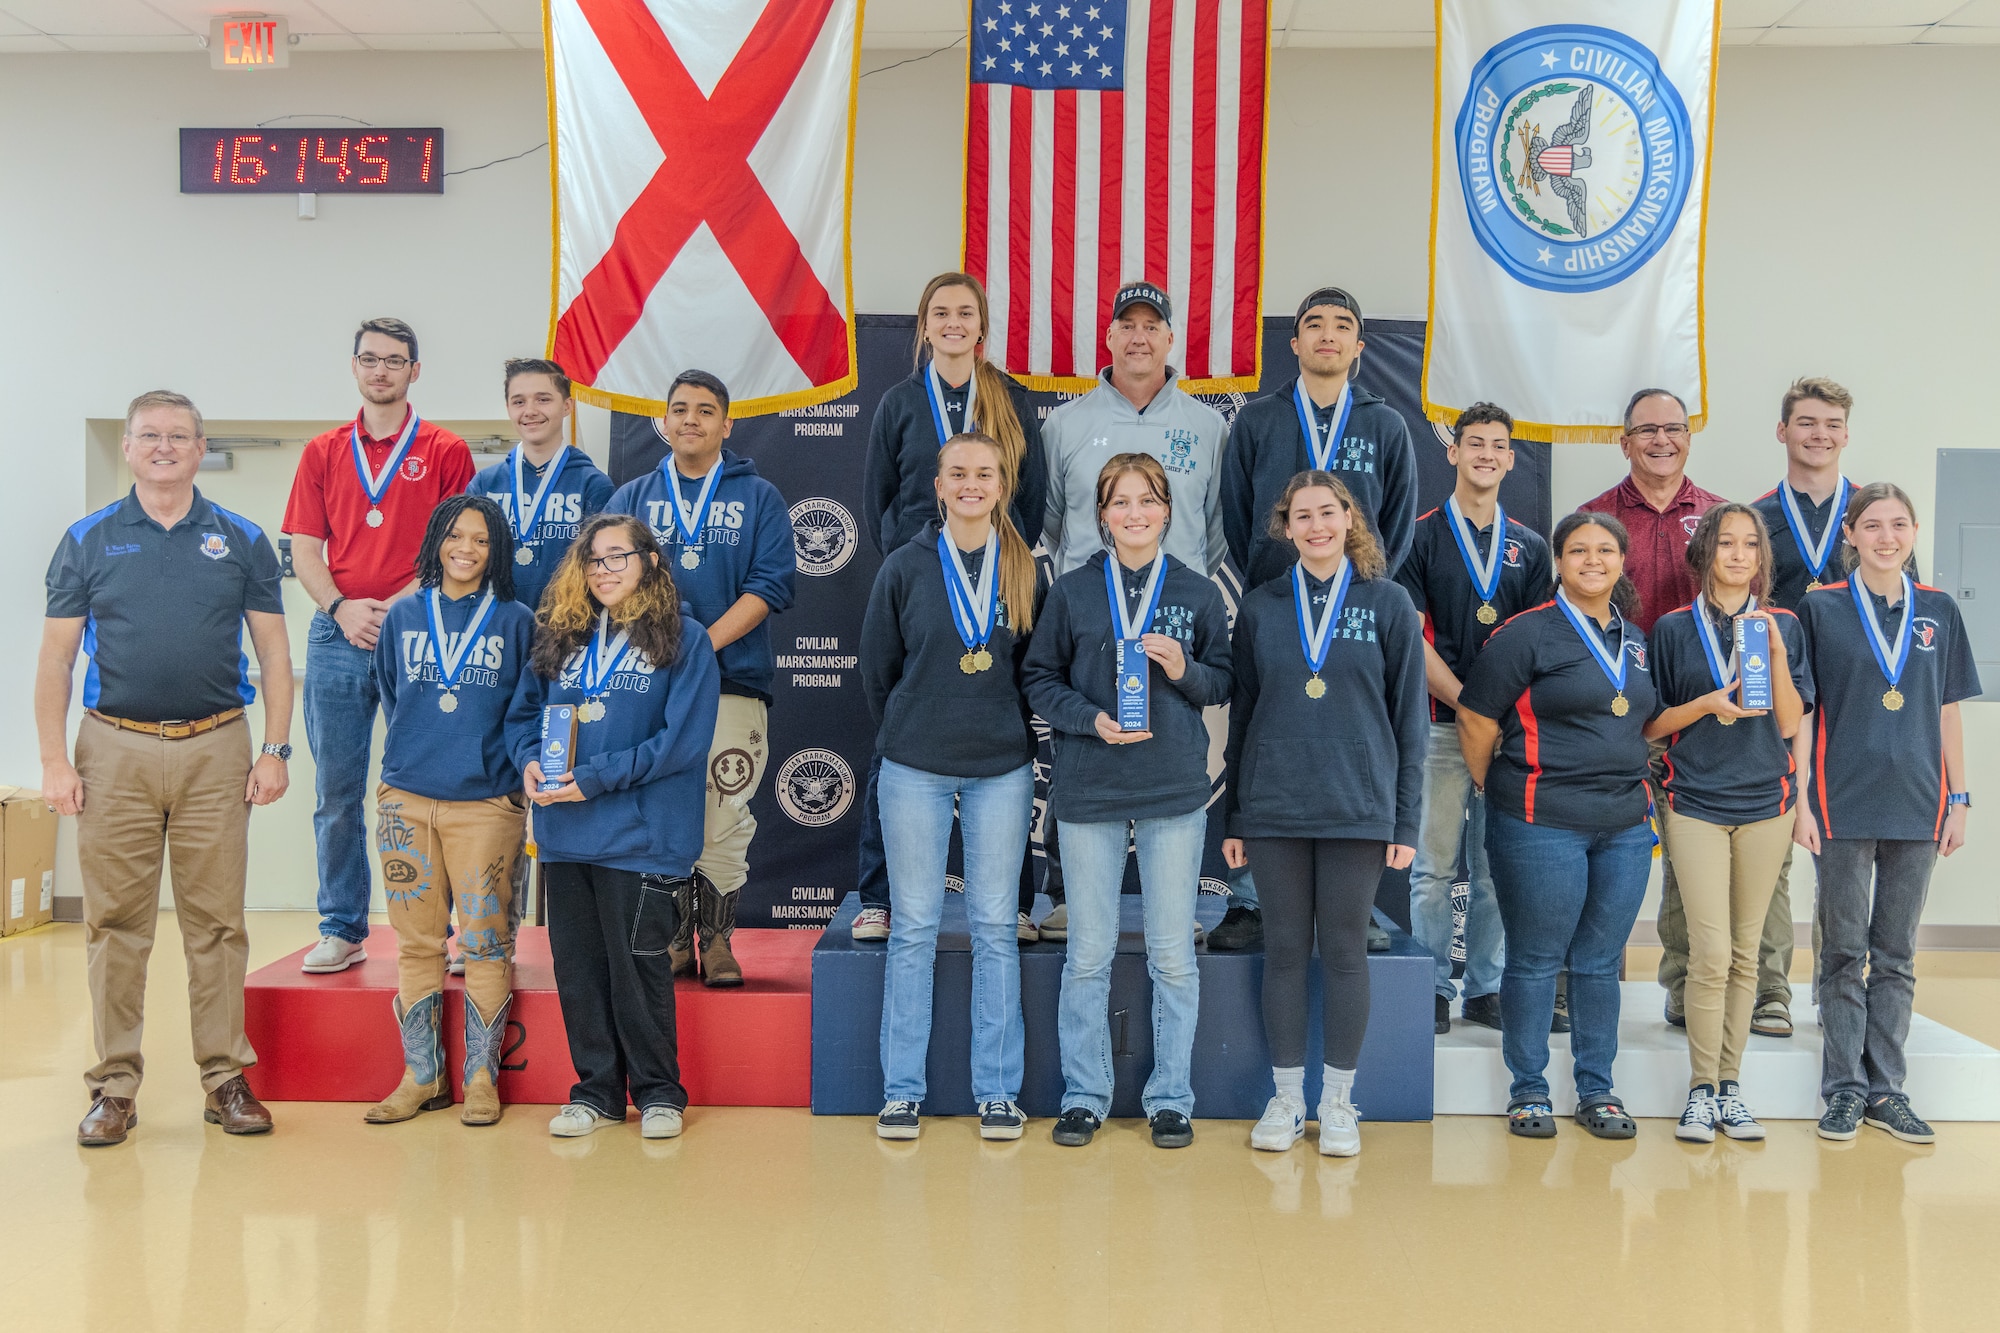 The top three Air Force Junior ROTC teams receive their awards in the Sporter Division at the JROTC Regional Service Championships on Feb. 10, 2024 in Anniston, Ala.